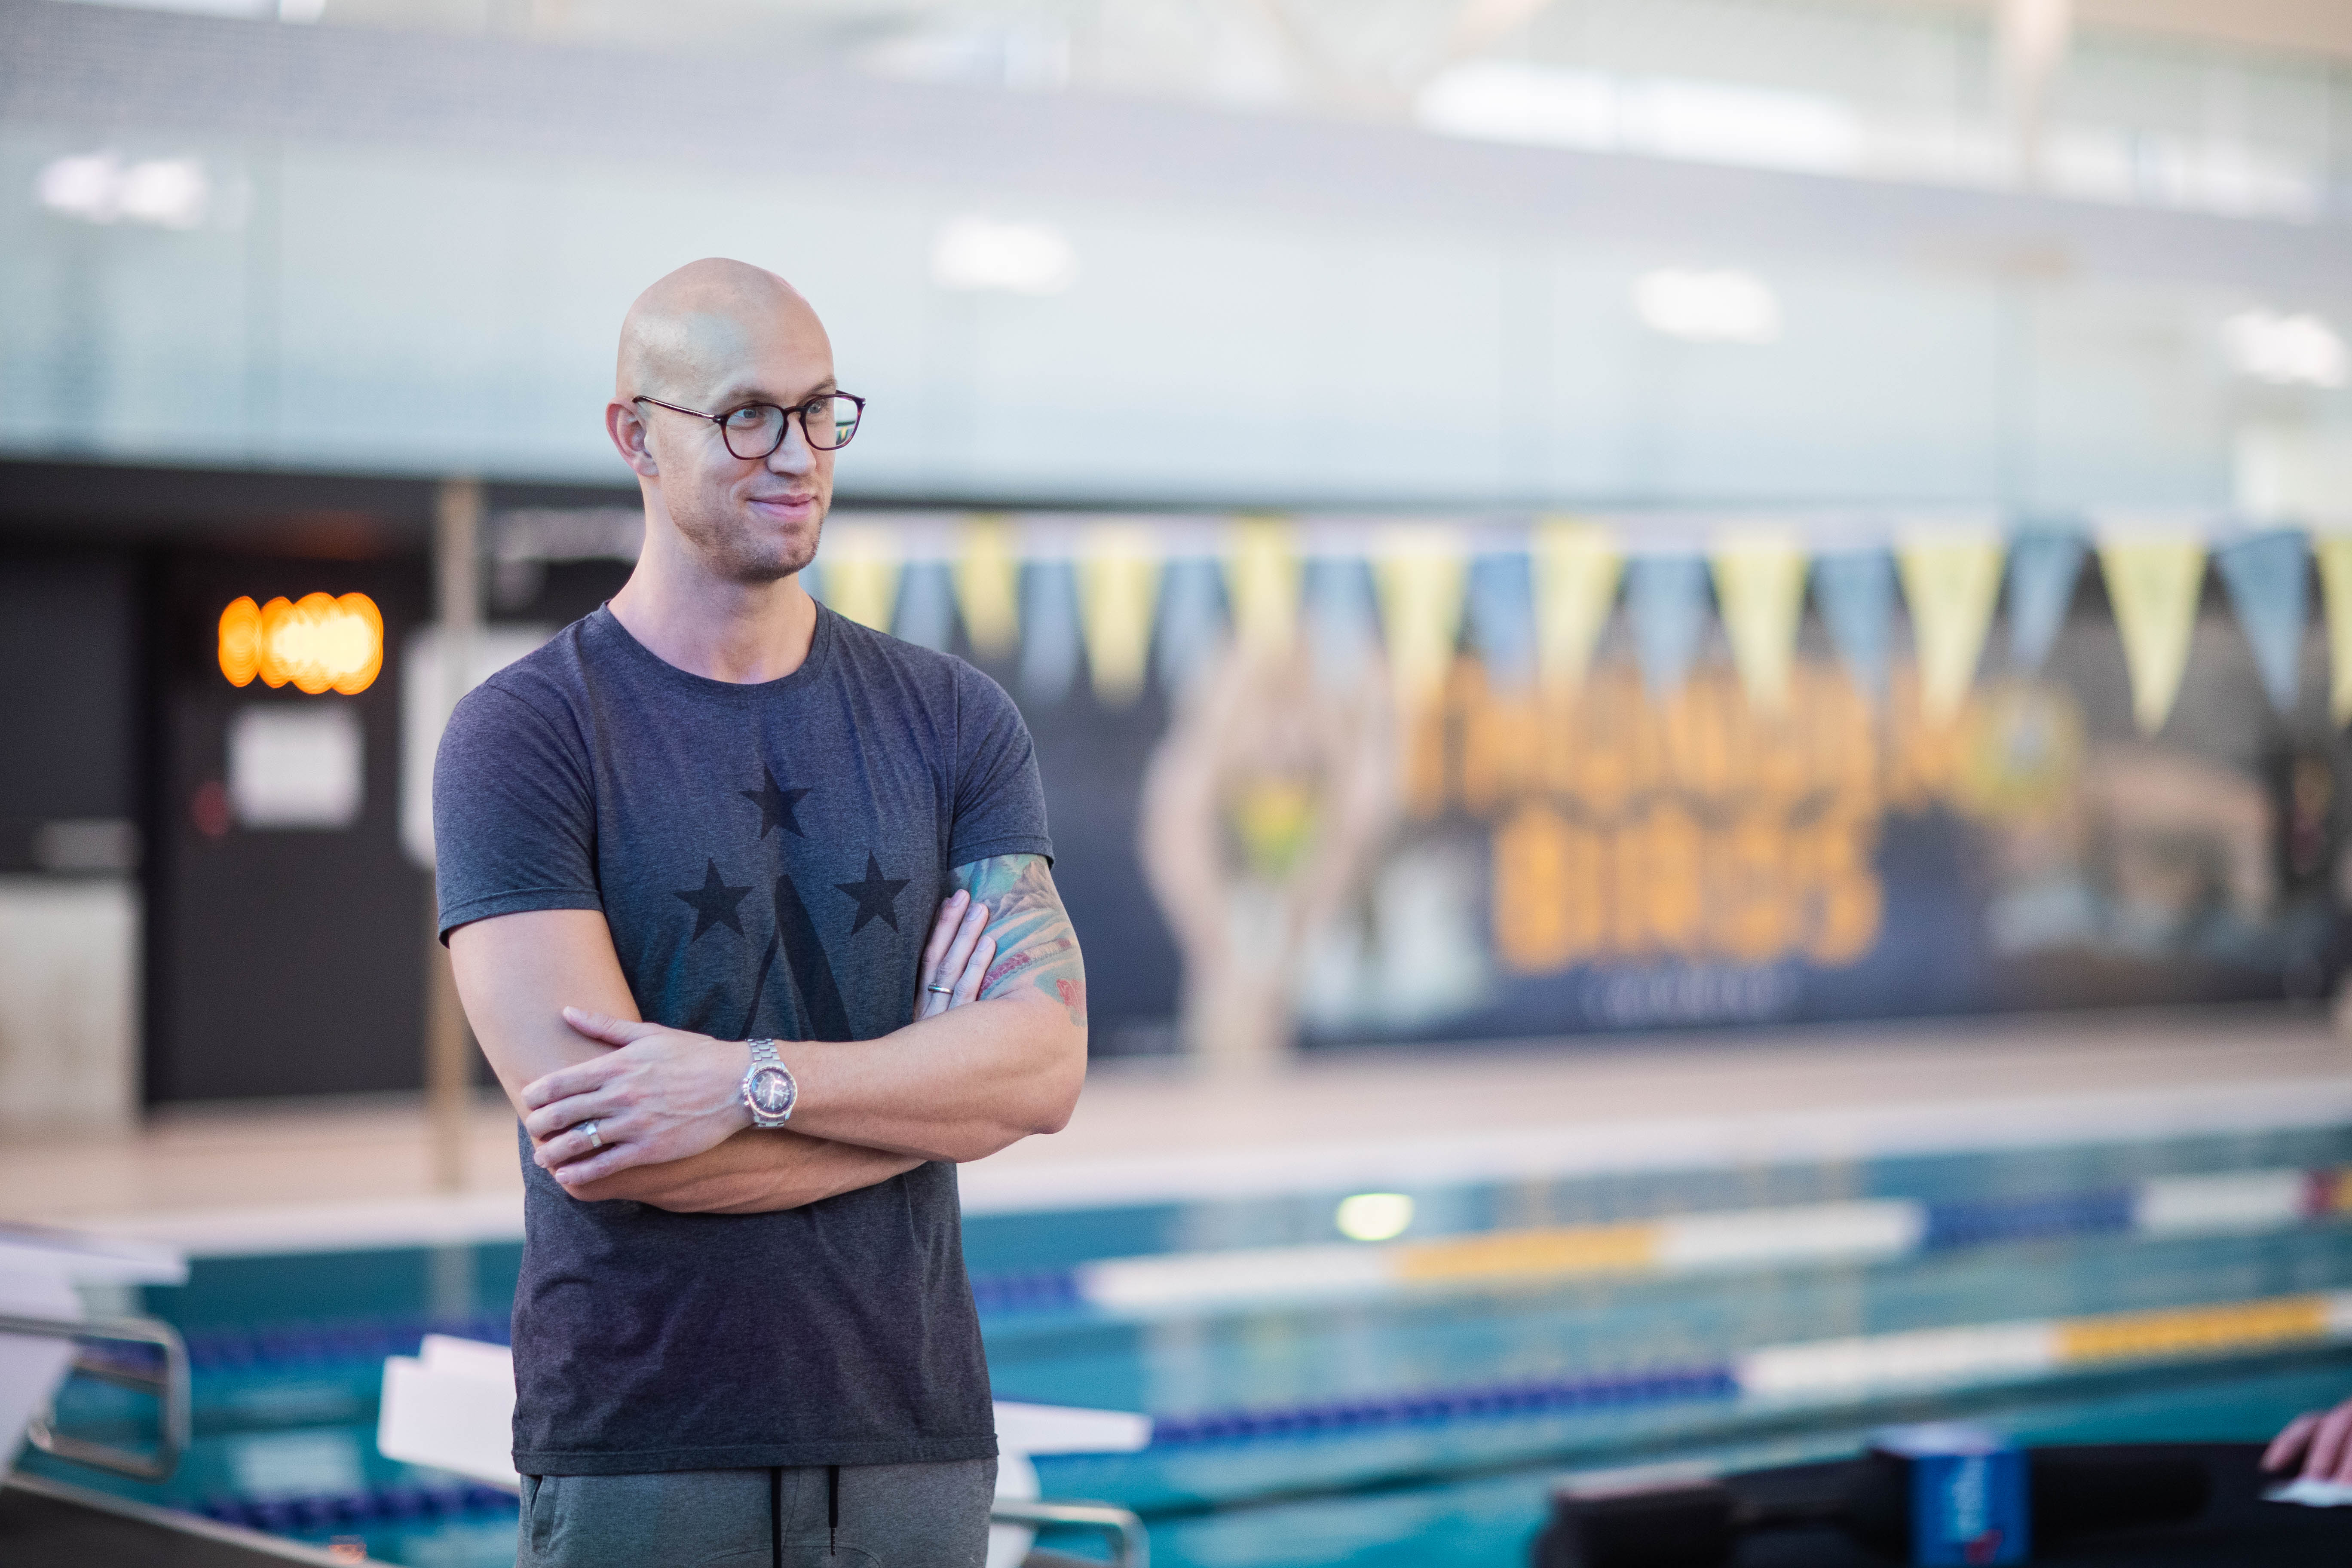 Brent Hayden announced his return to competitive swimming in October.